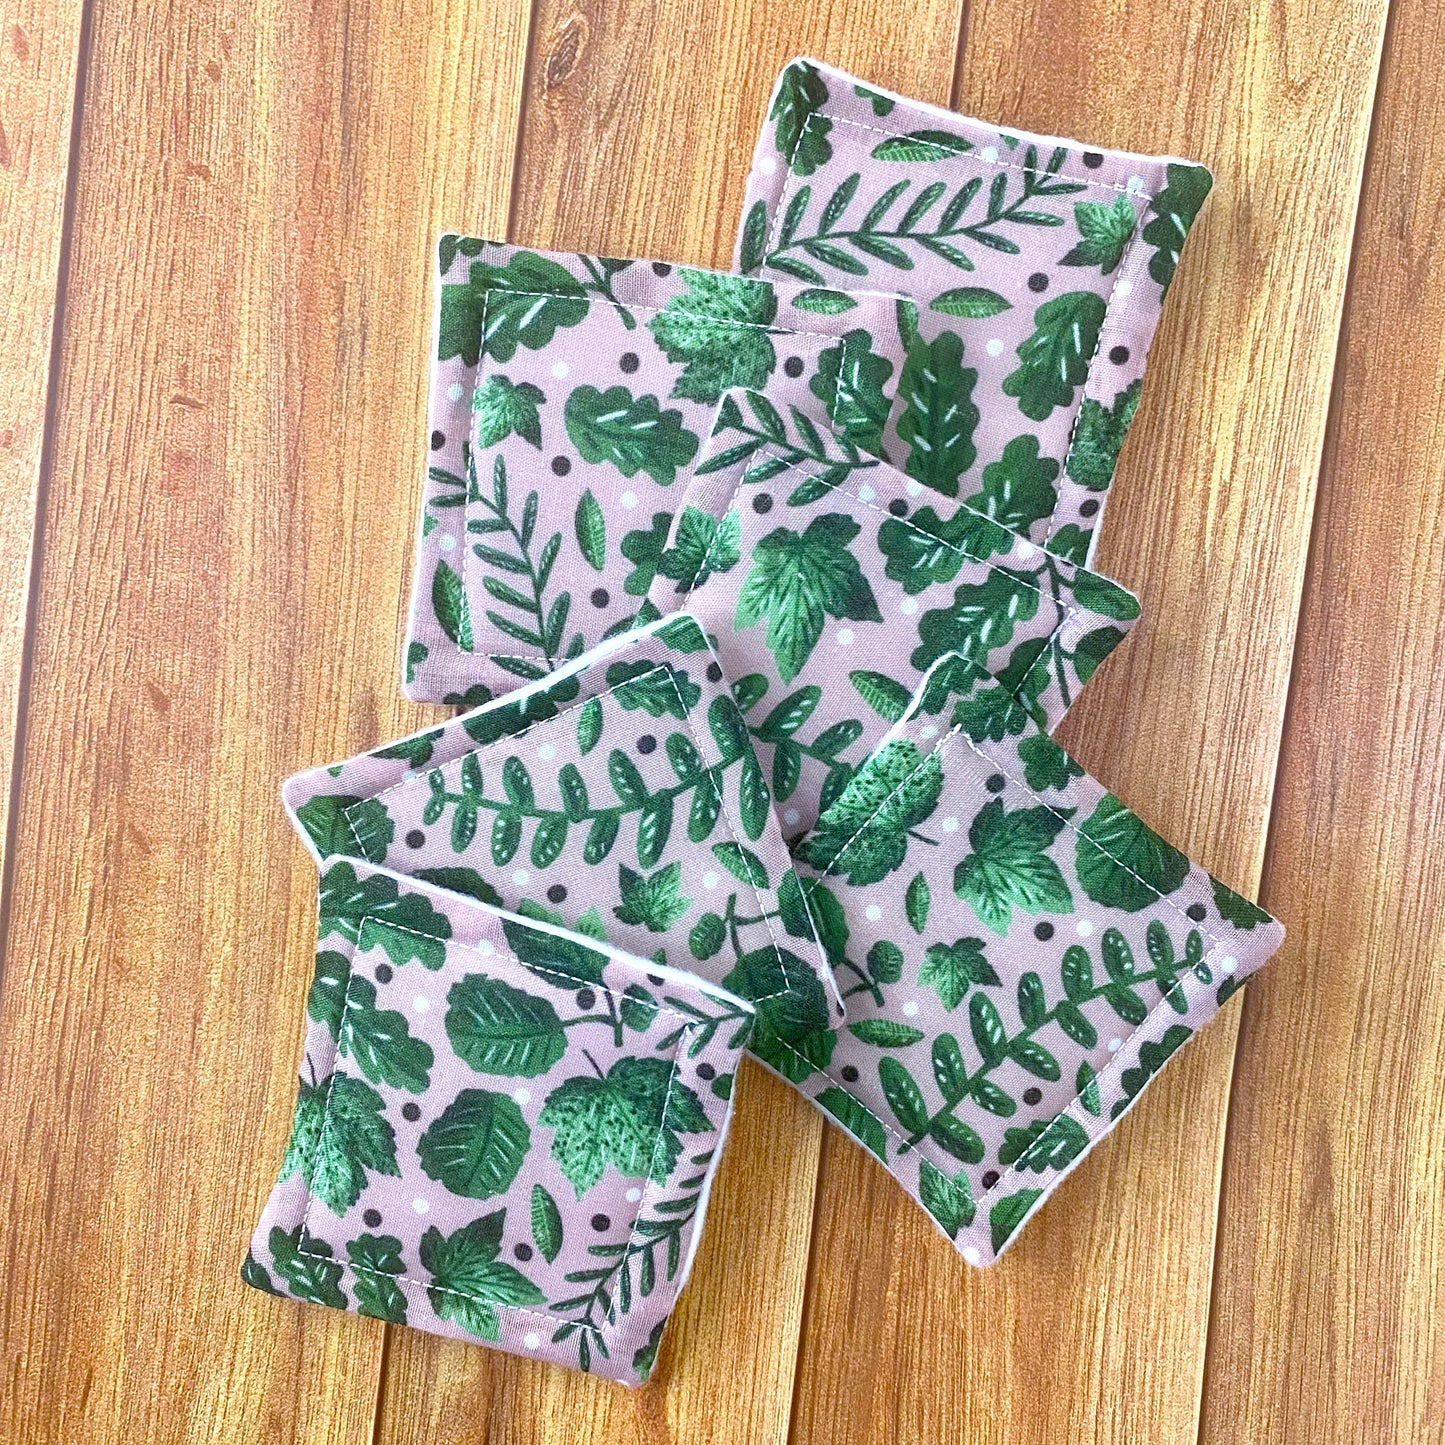 green foliage patterned reusable skincare pads on wooden surface